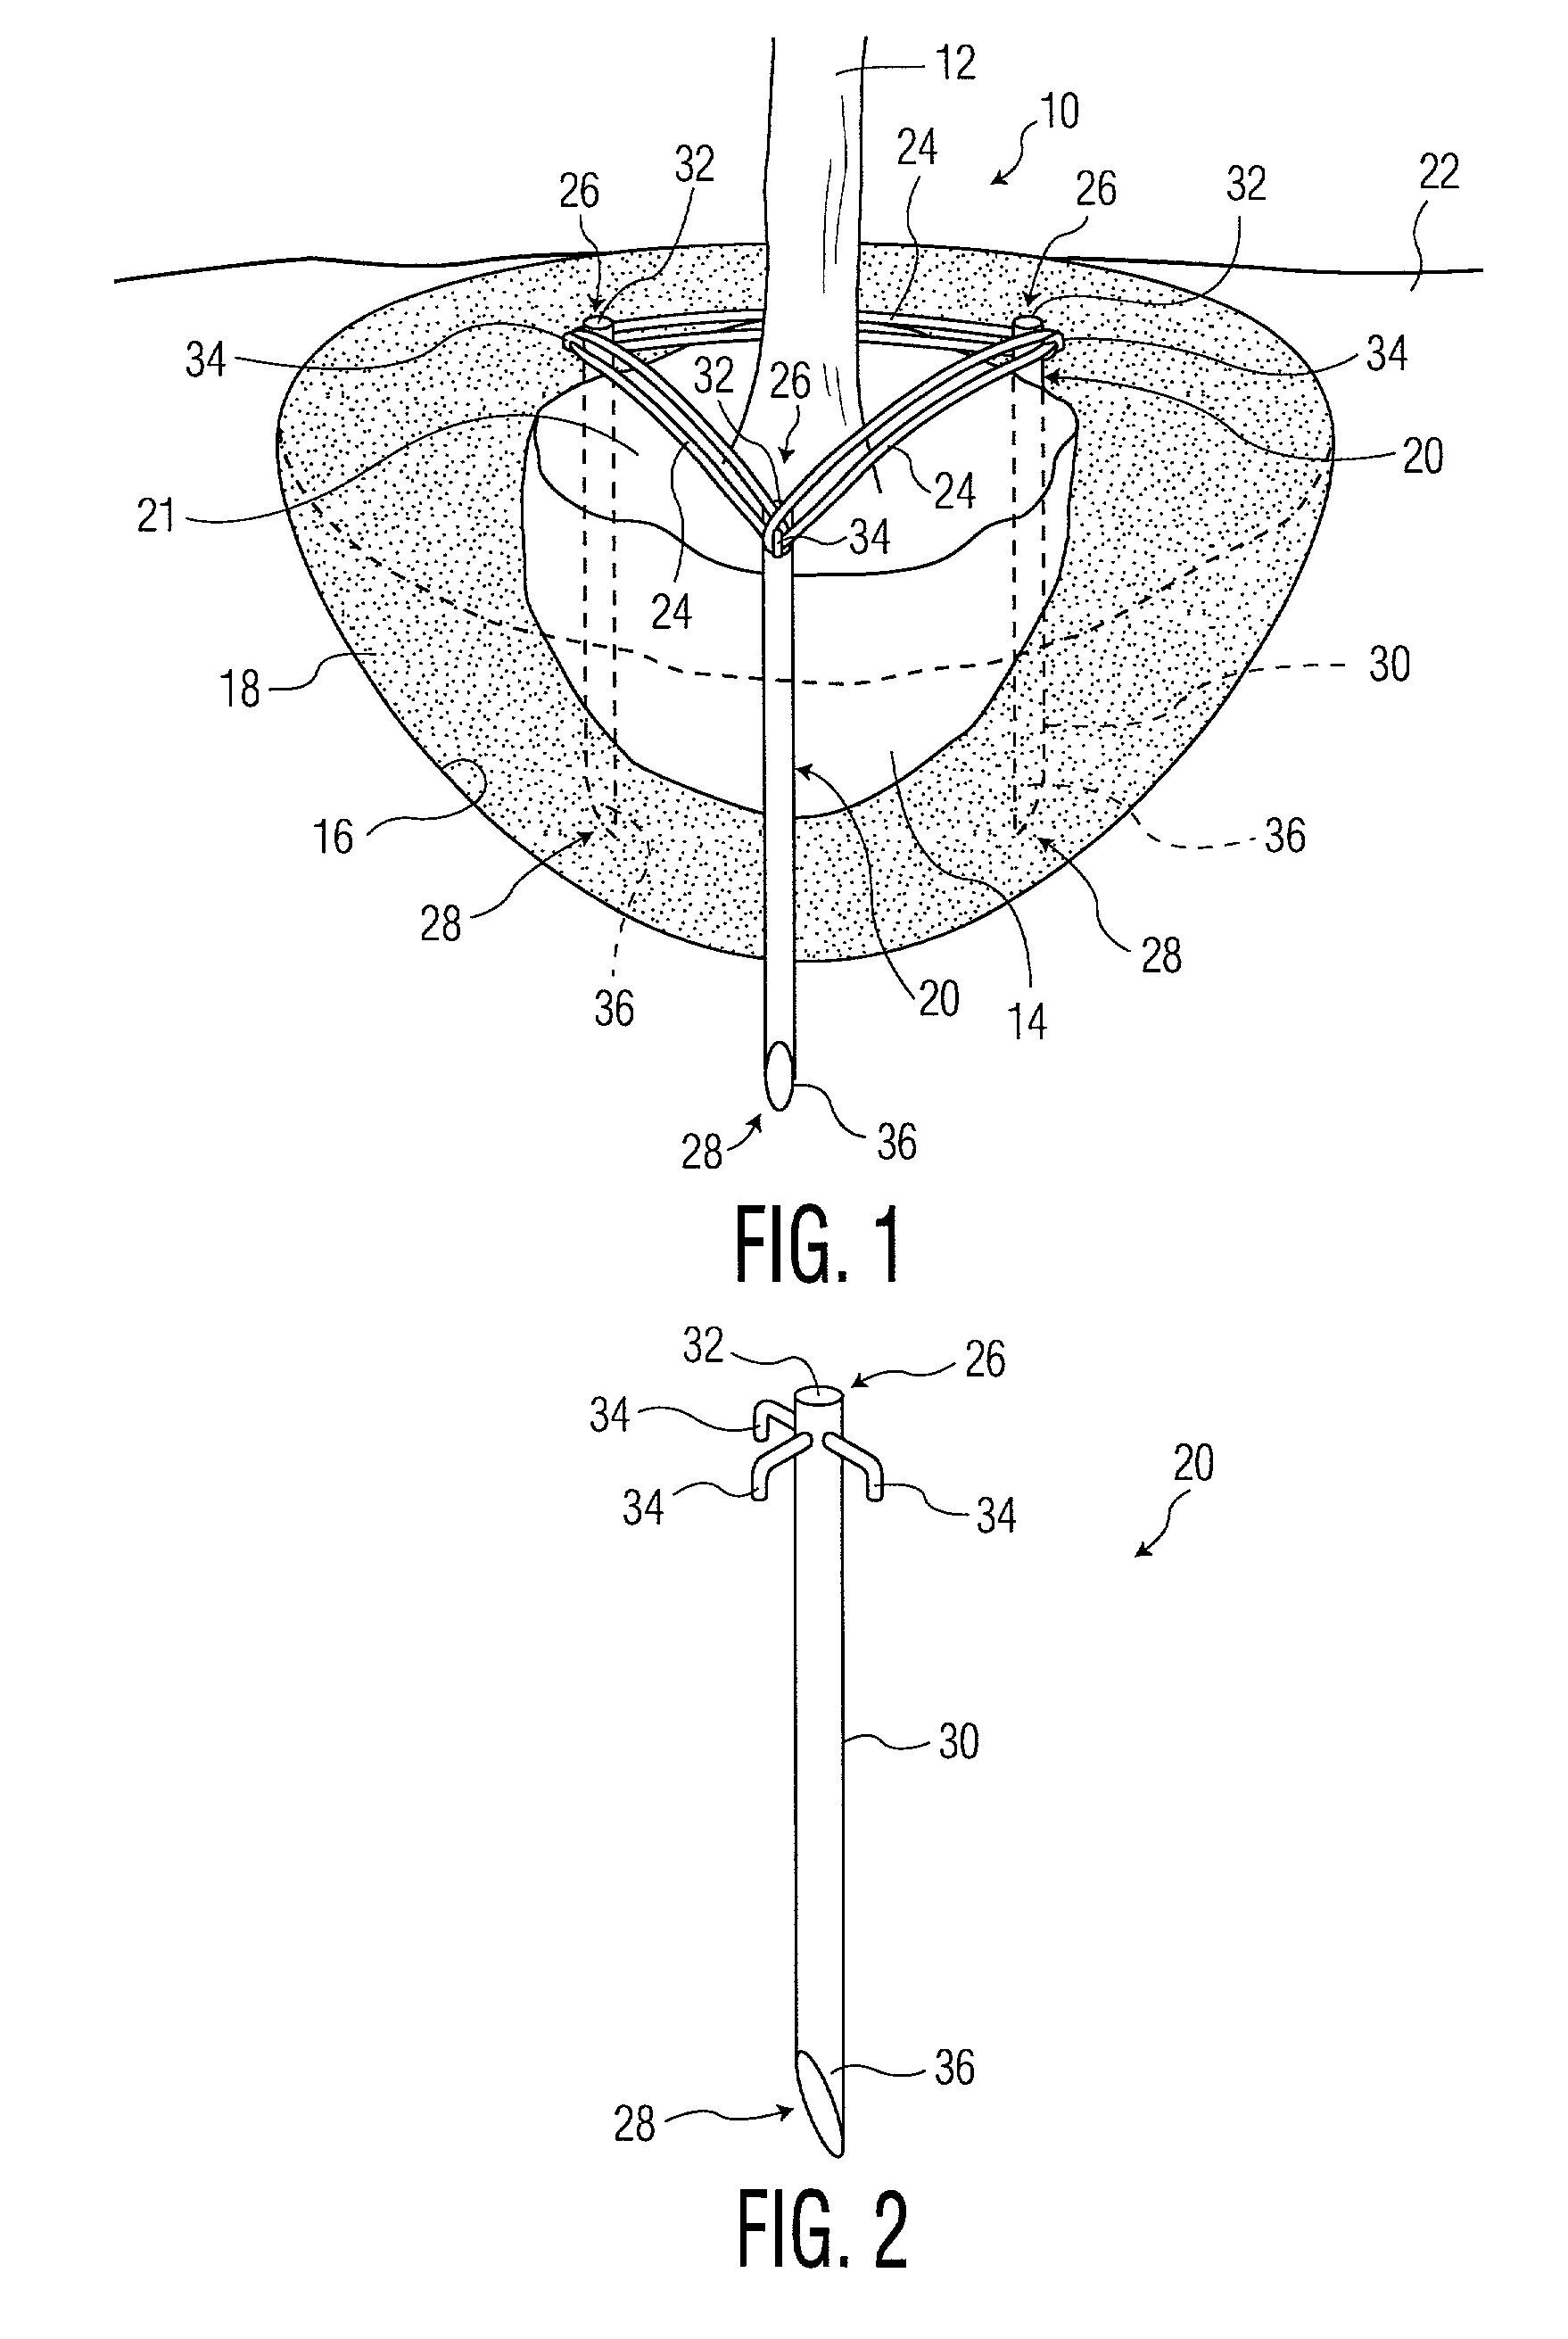 Tree and shrub stabilizing apparatus and method for stabilizing a tree or shrub